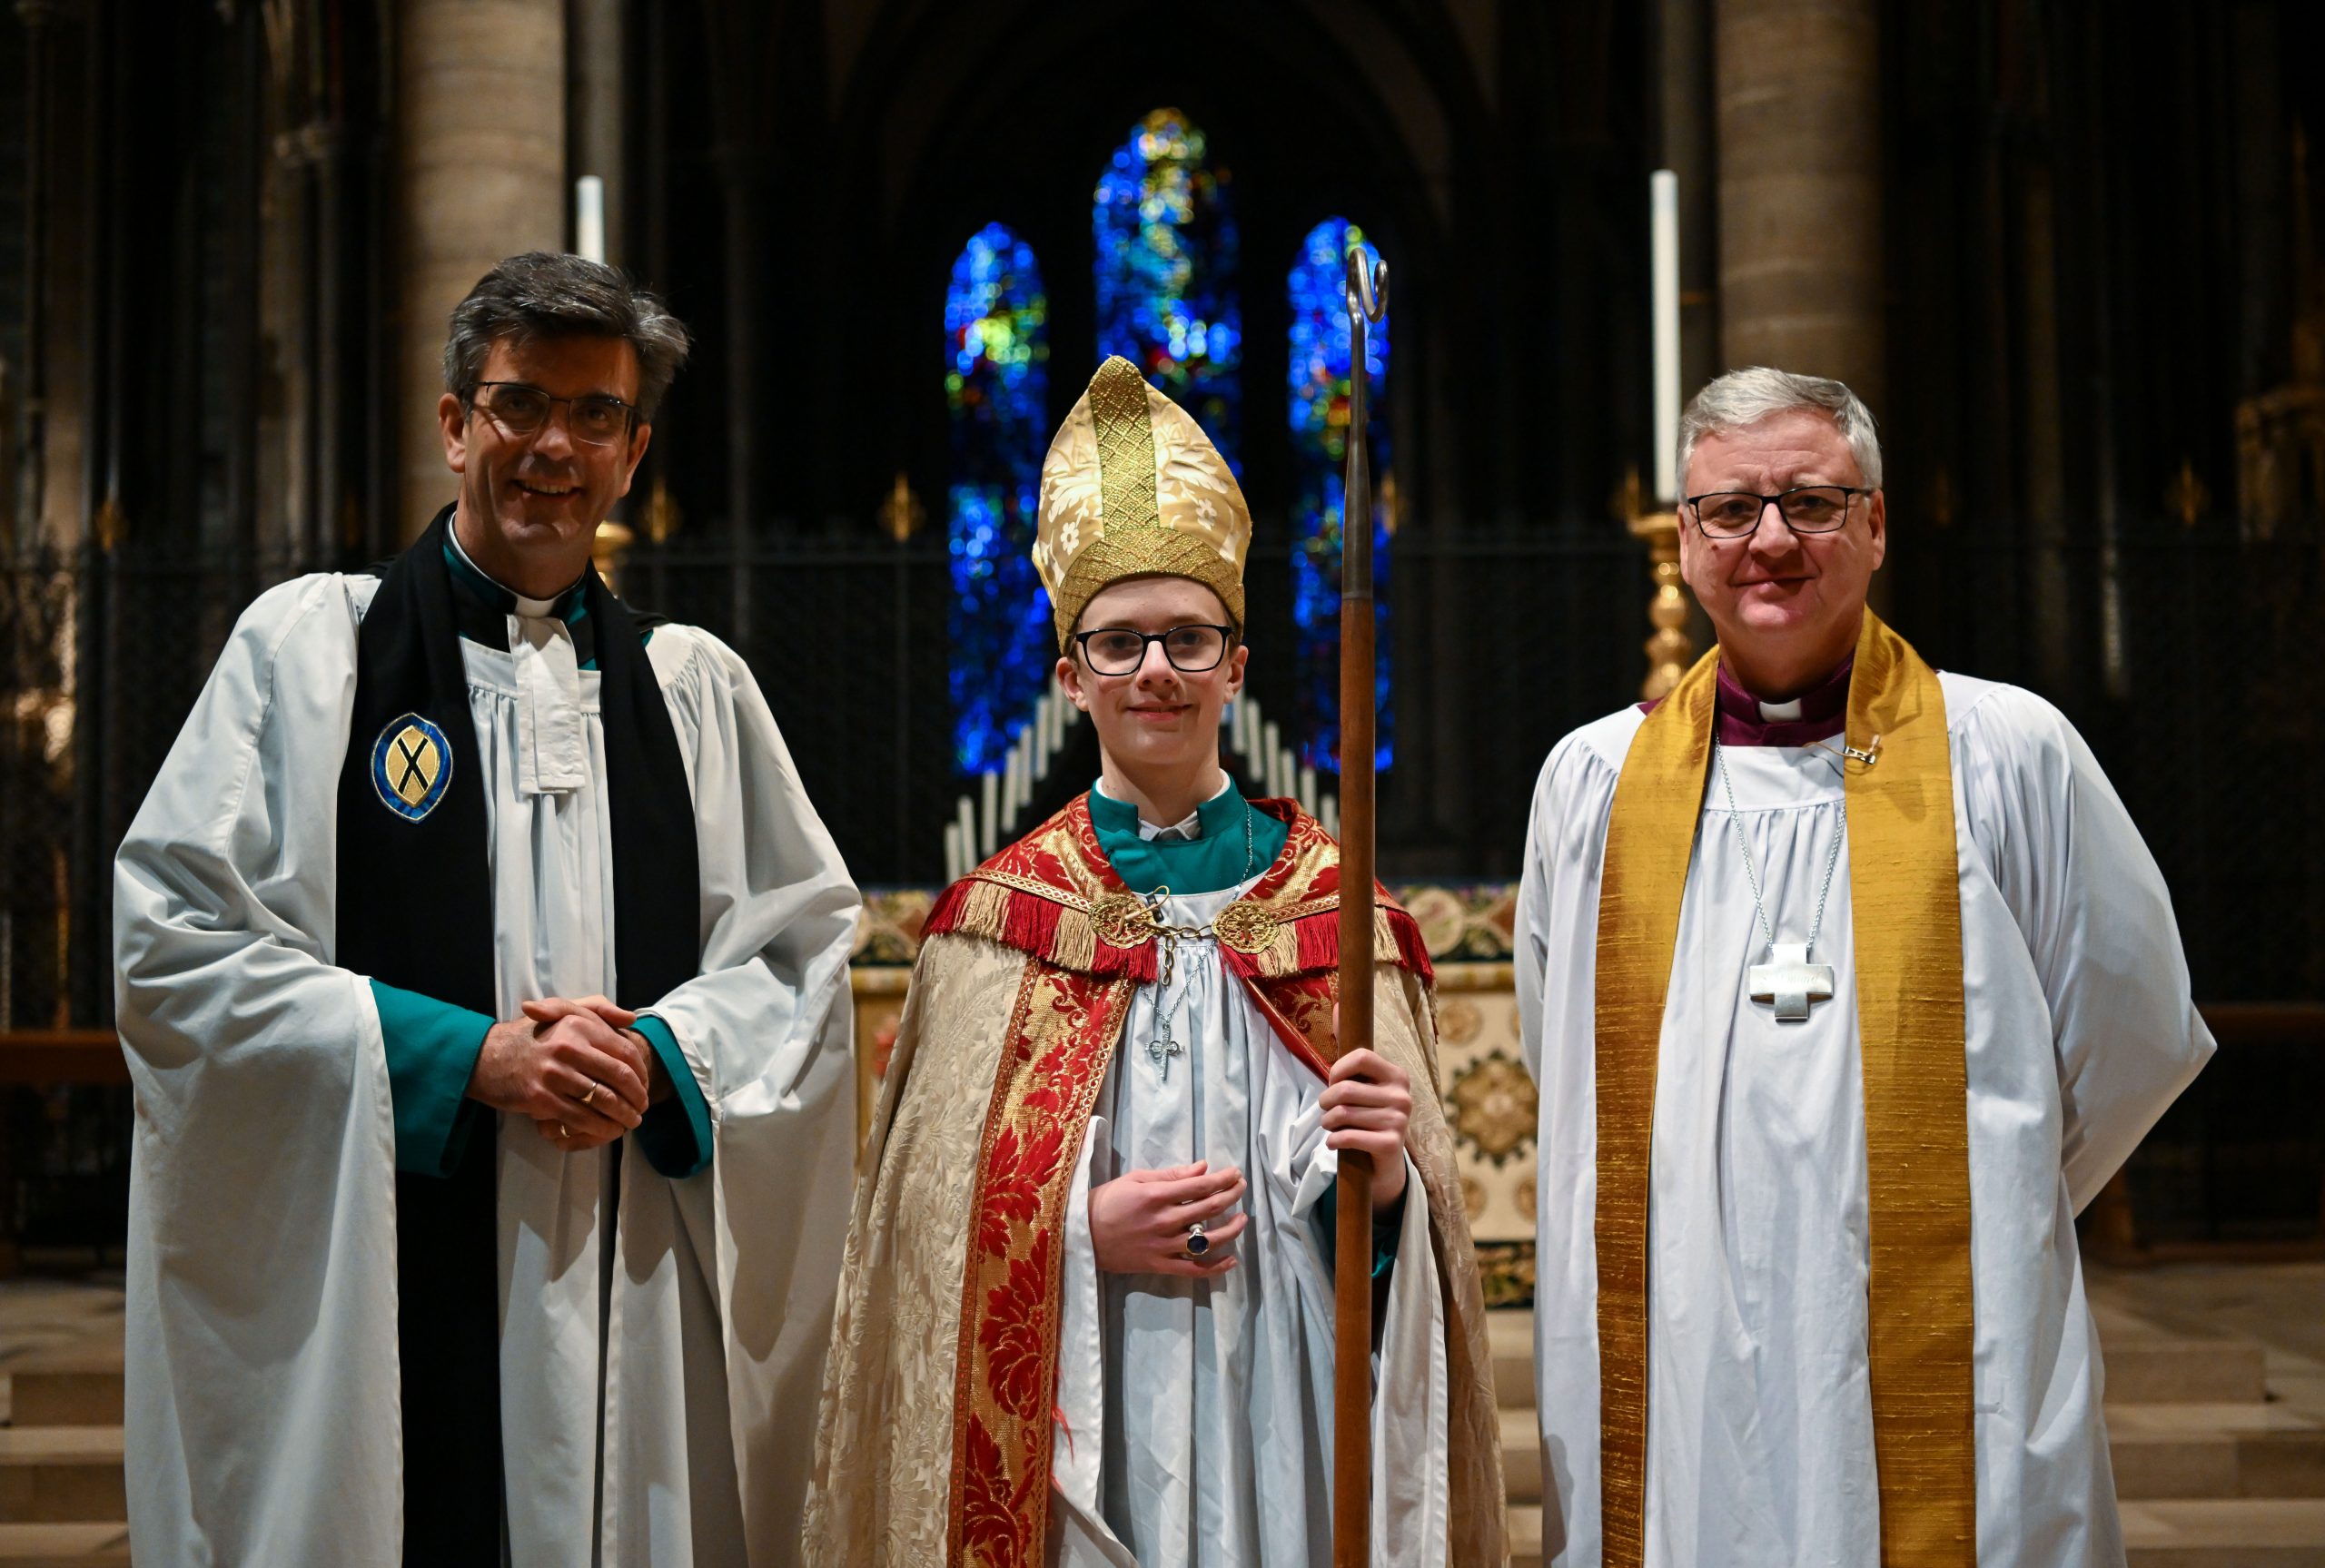 Welcome to our new Chorister Bishop